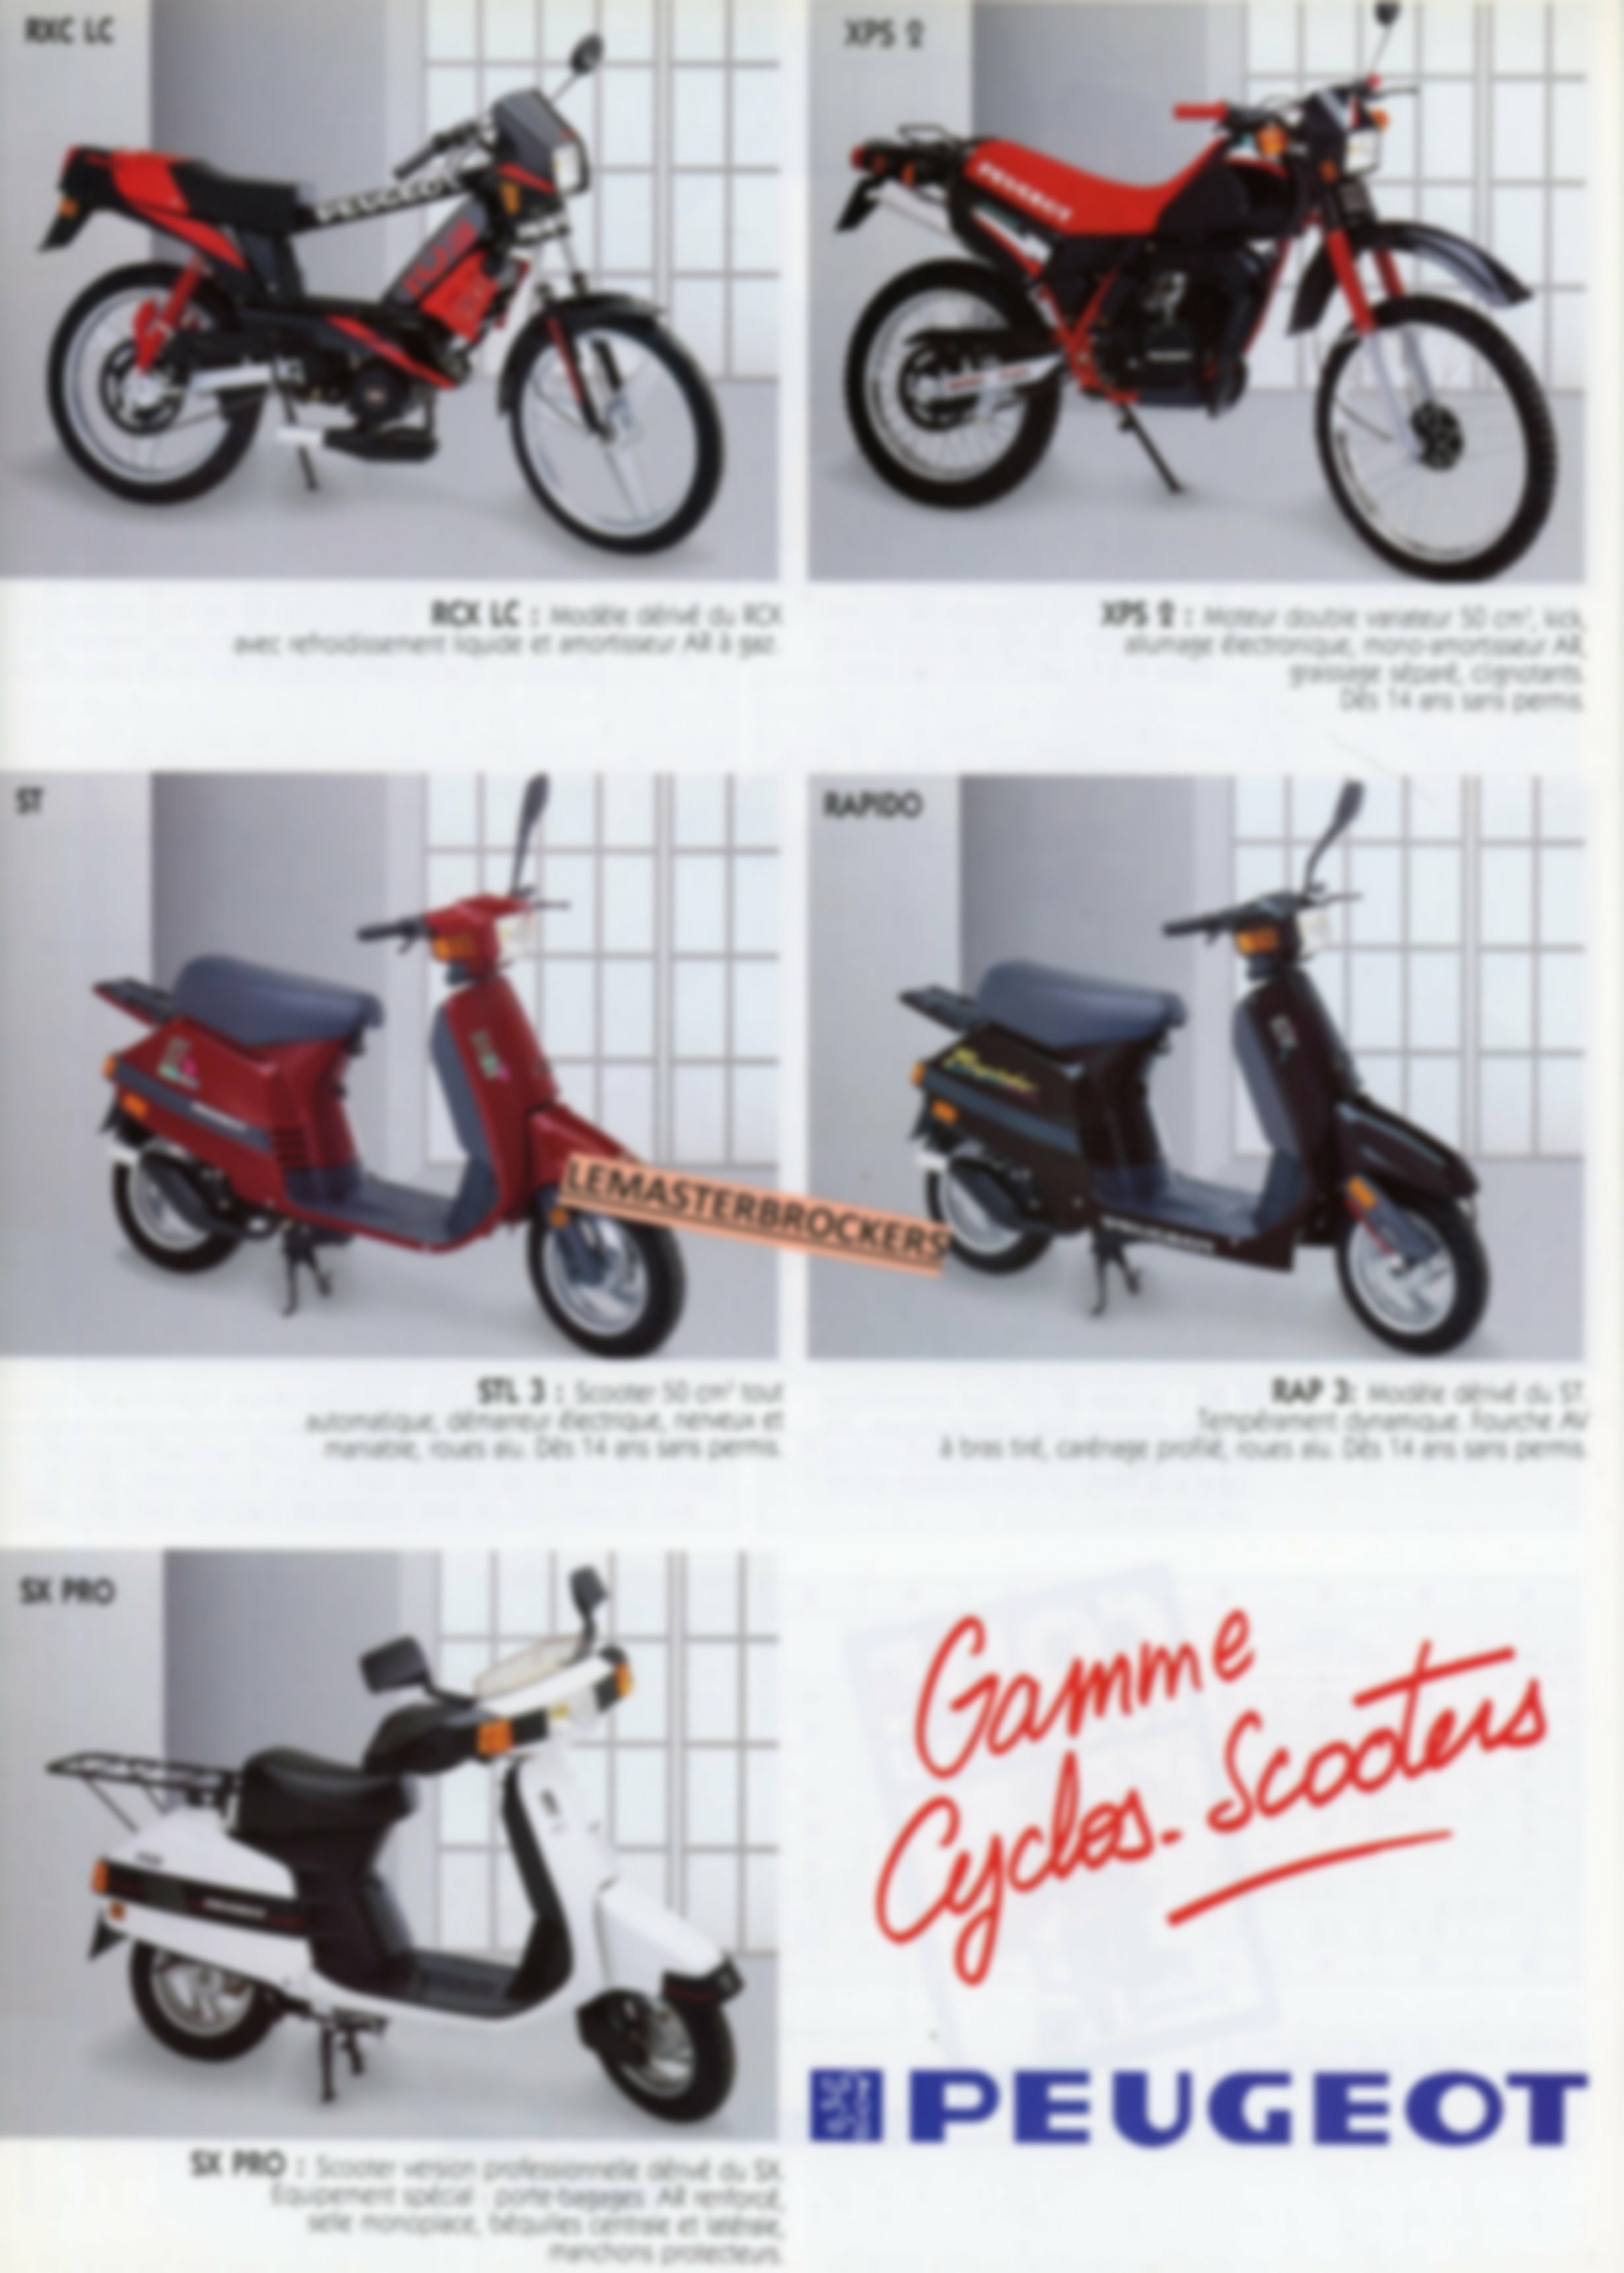 BROCHURE-PEUGEOT-MOBYLETTE-SPX-103-CHRONO-RCX-SCOOTER-LEMASTERBROCKERS